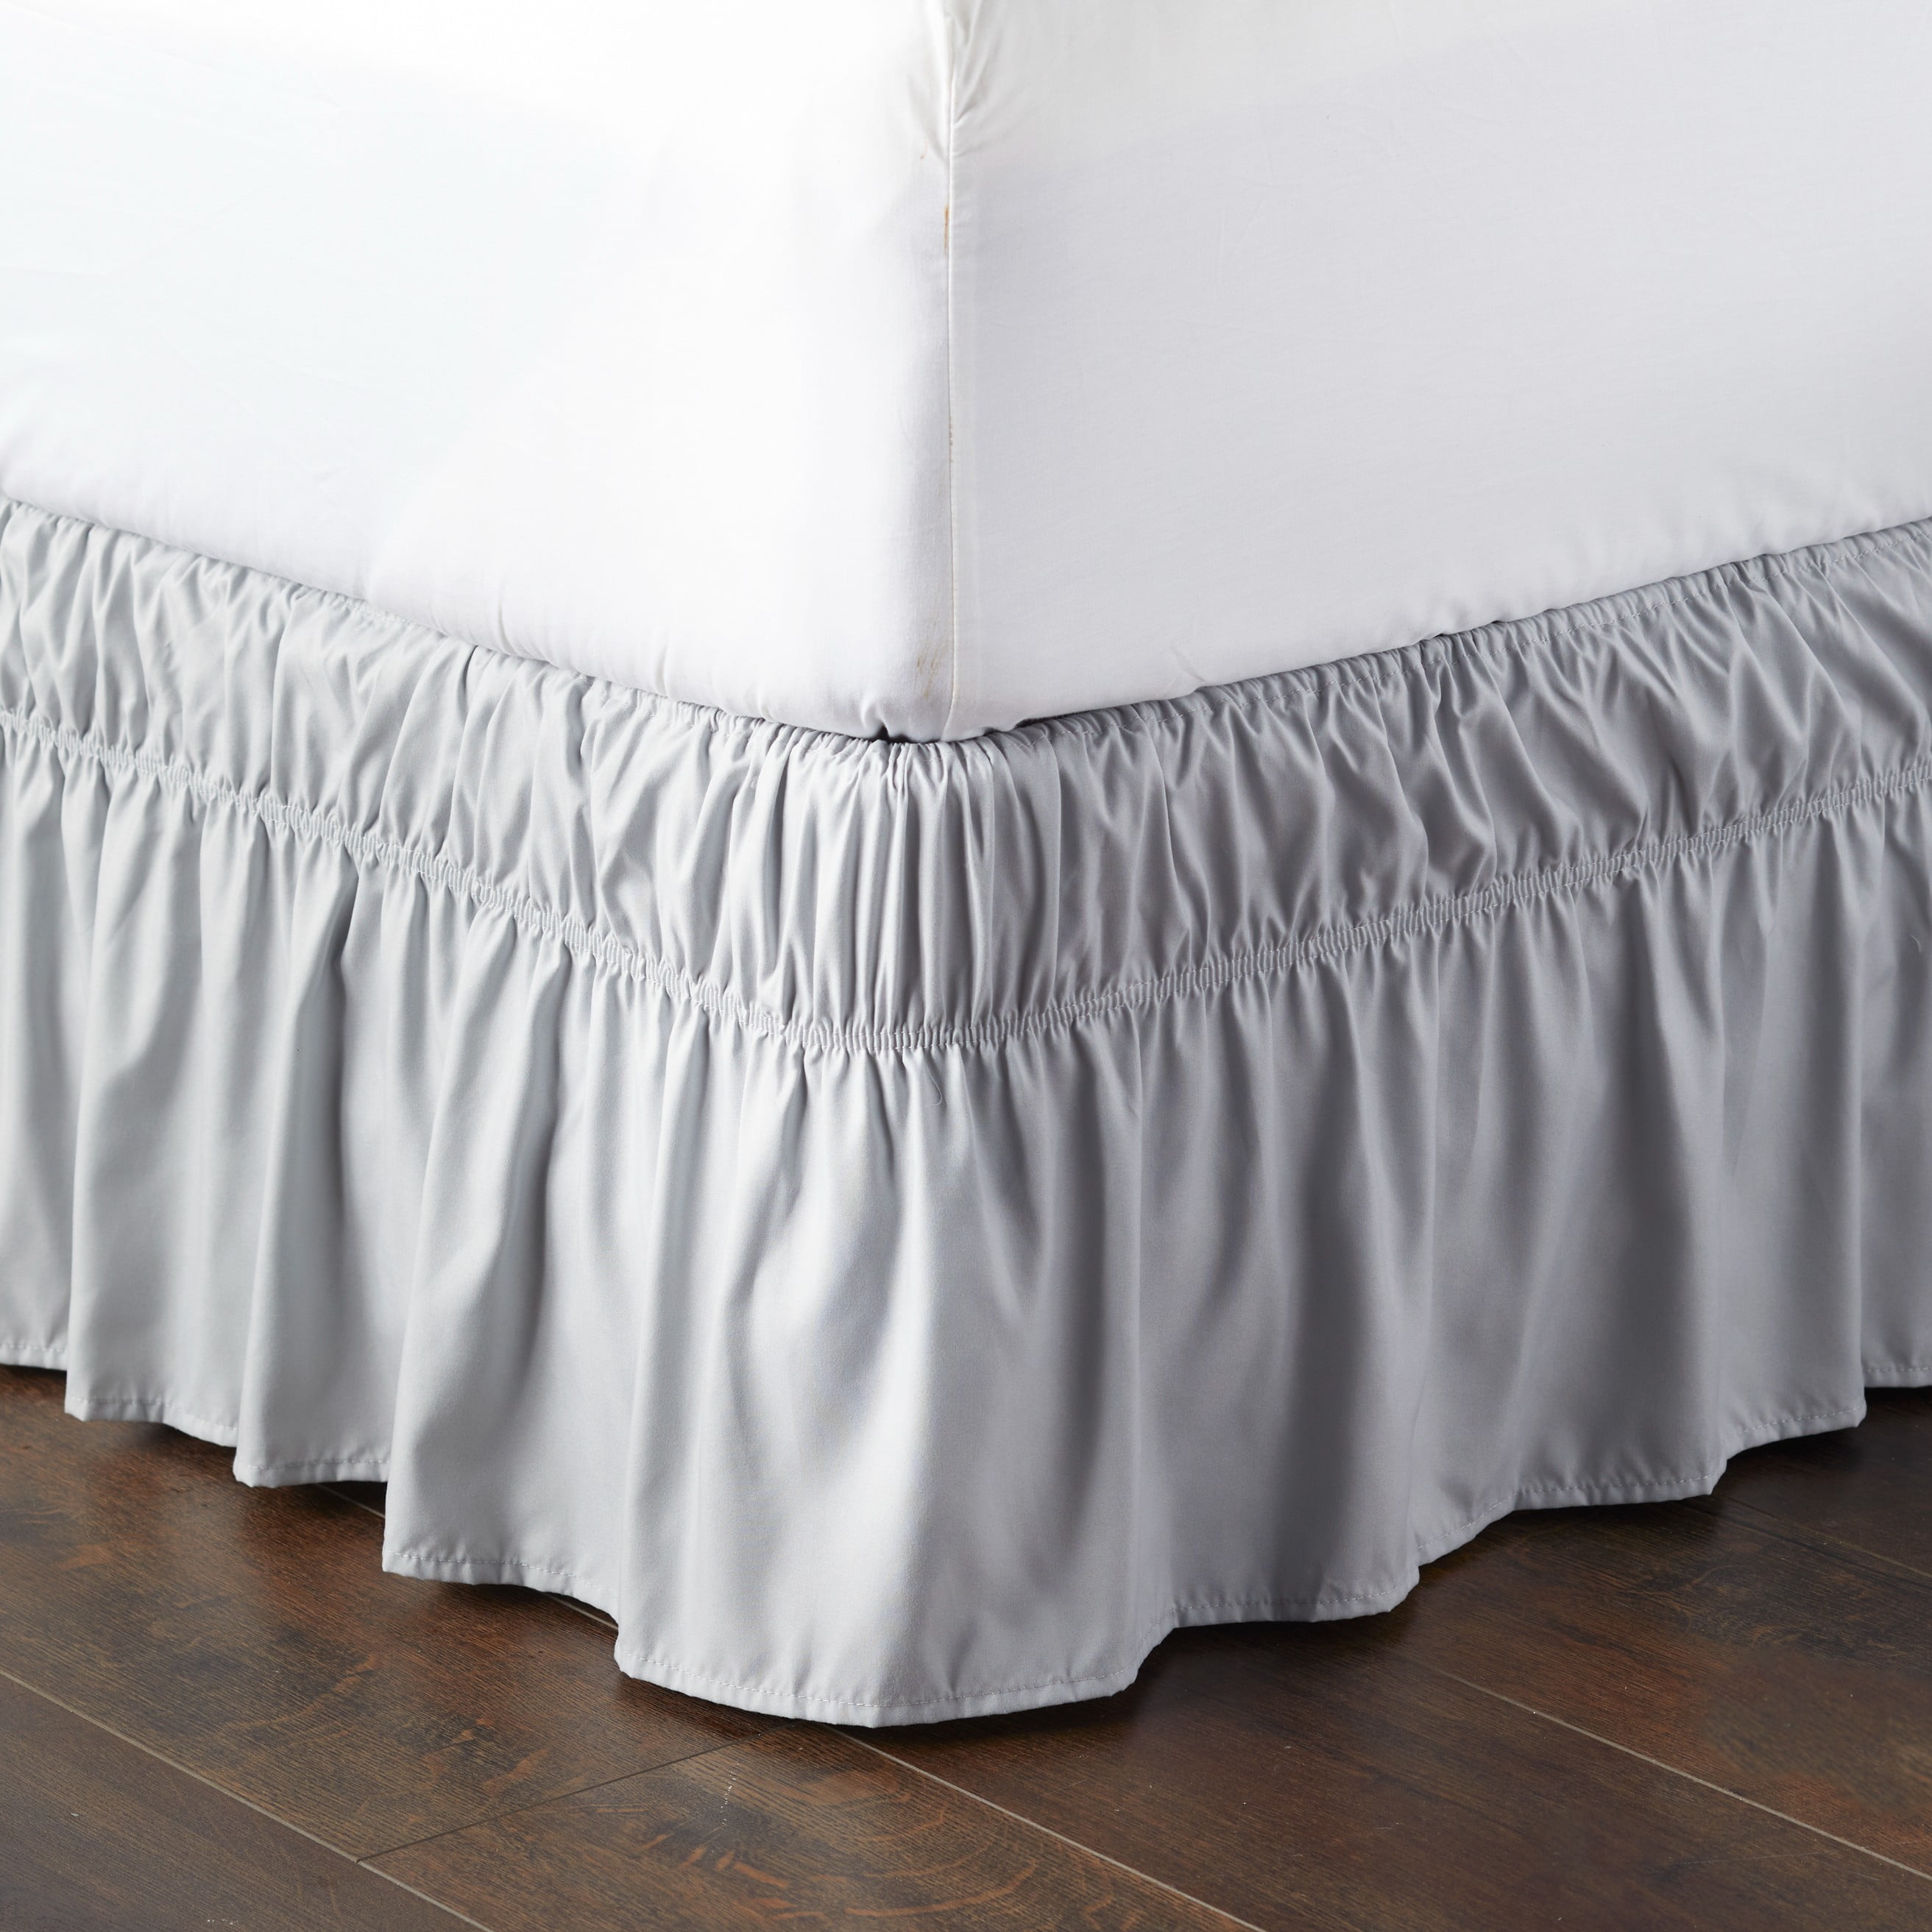 Simply Shabby Chic Twin Bed Skirt White Ruffle 15" Drop 100% Cotton New 